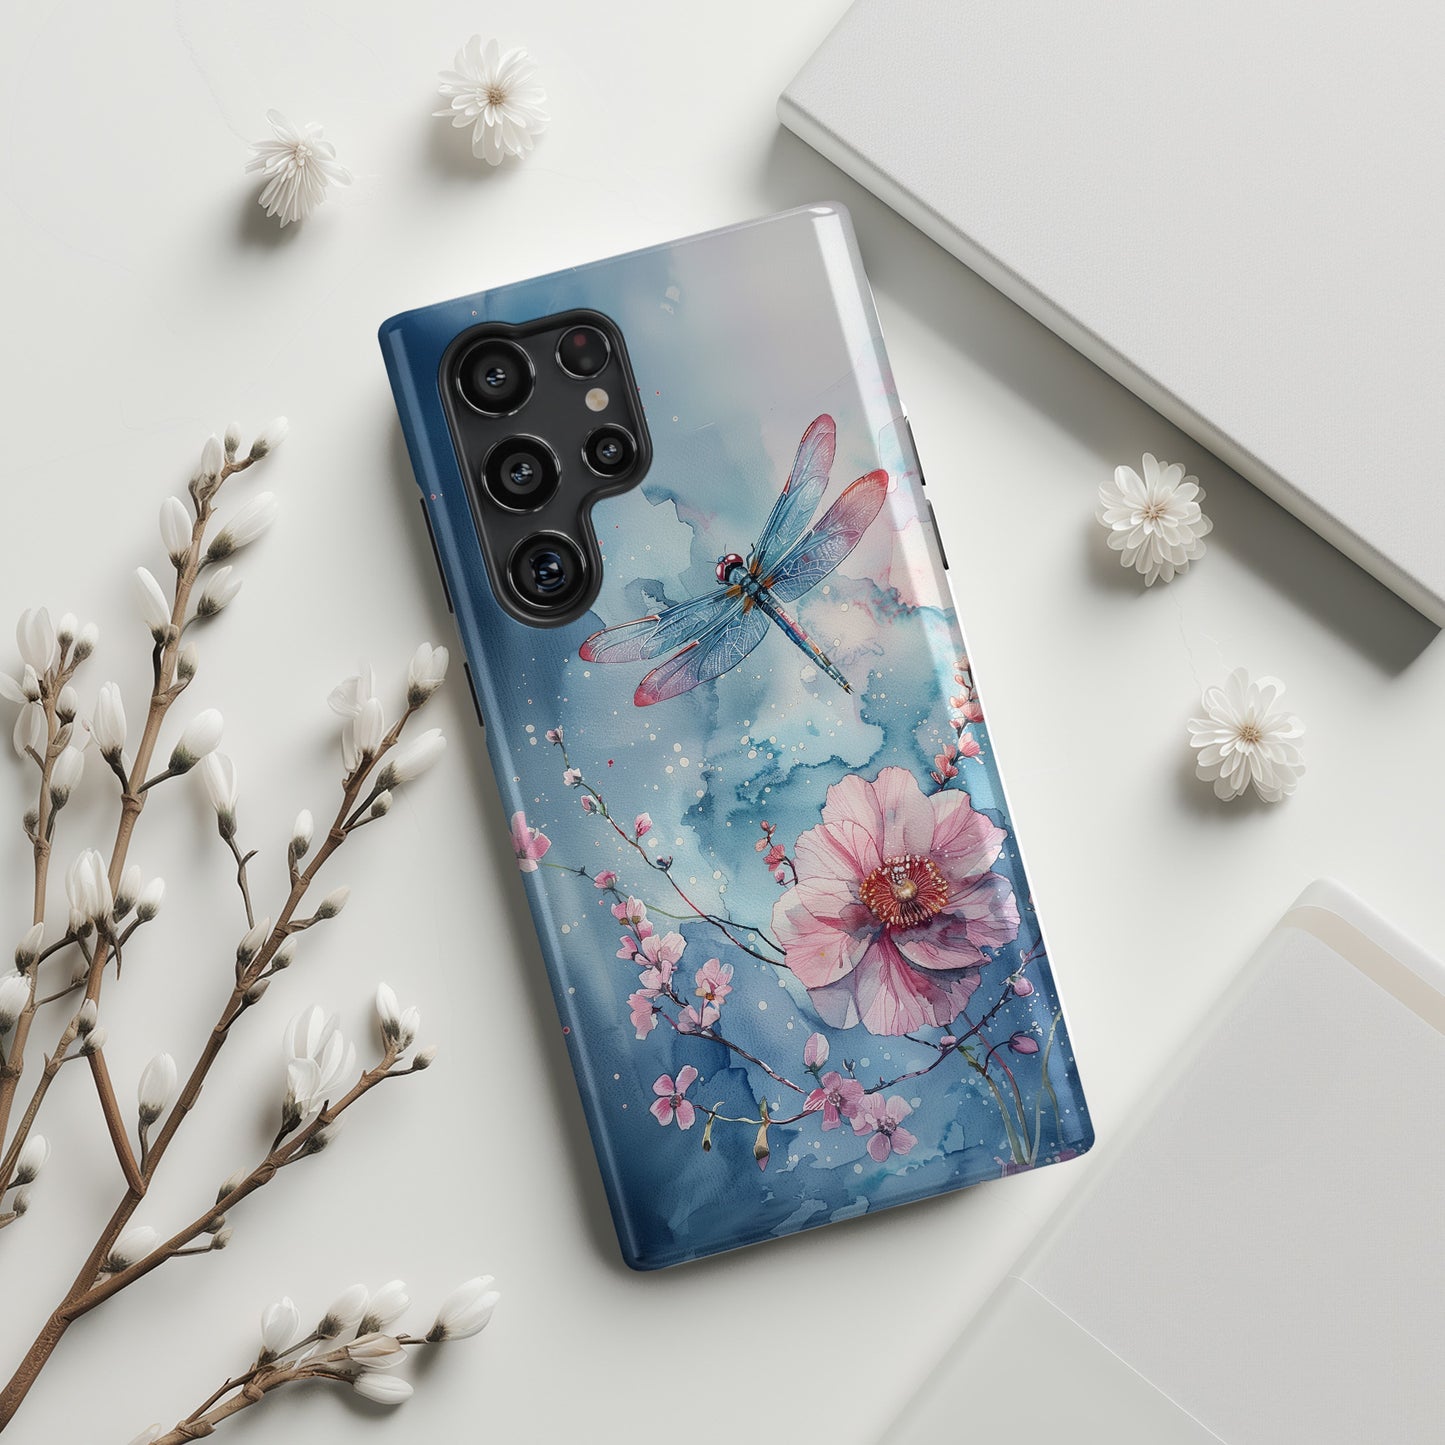 Watercolor Floral Dragonfly Design Samsung Phone Case